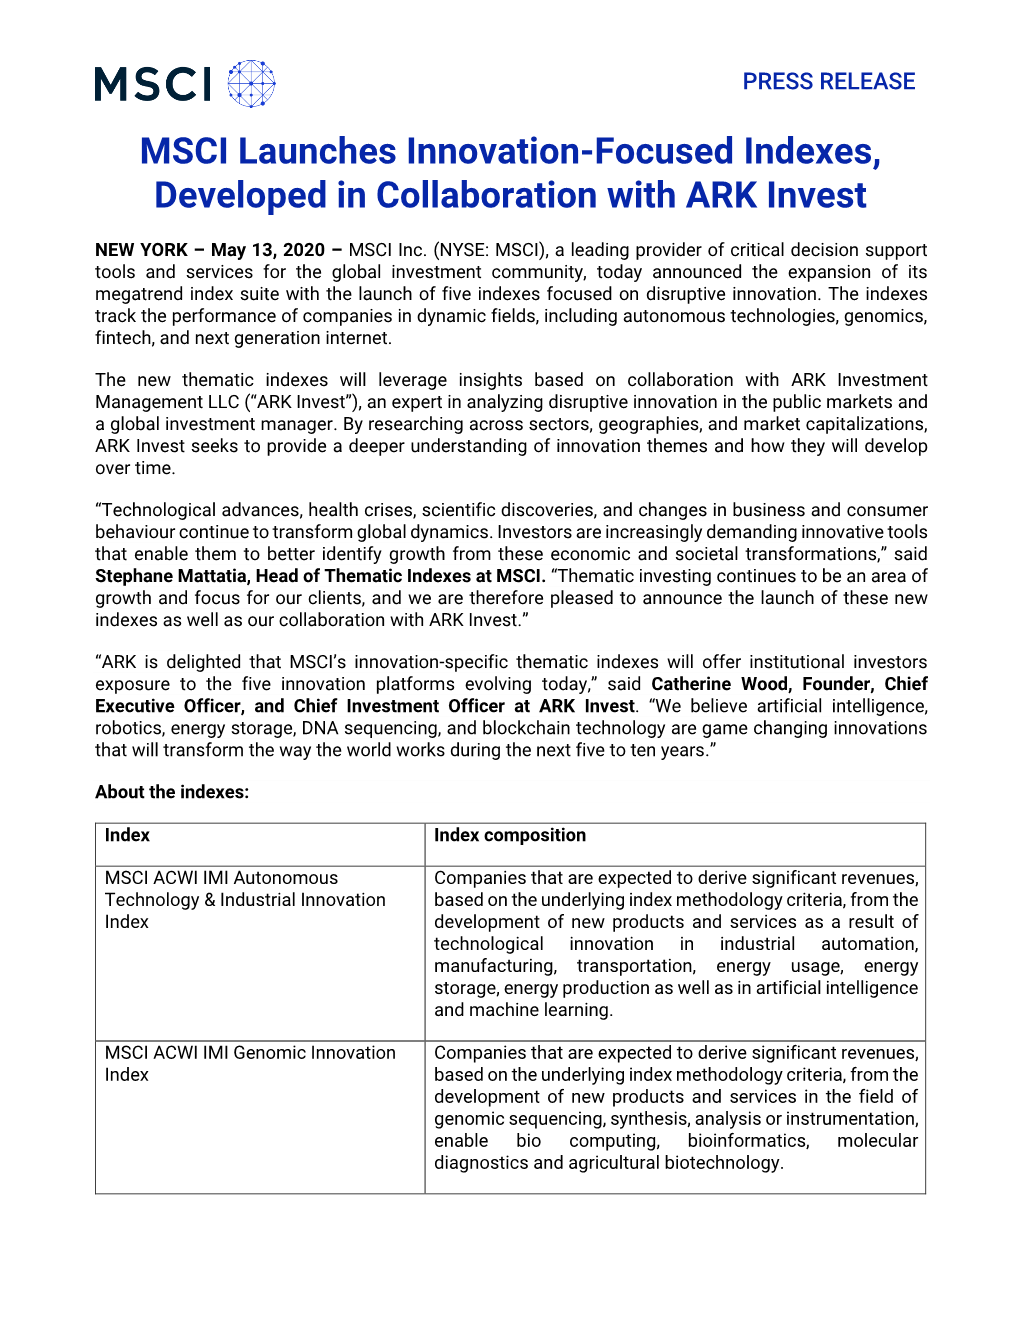 MSCI Launches Innovation-Focused Indexes, Developed in Collaboration with ARK Invest